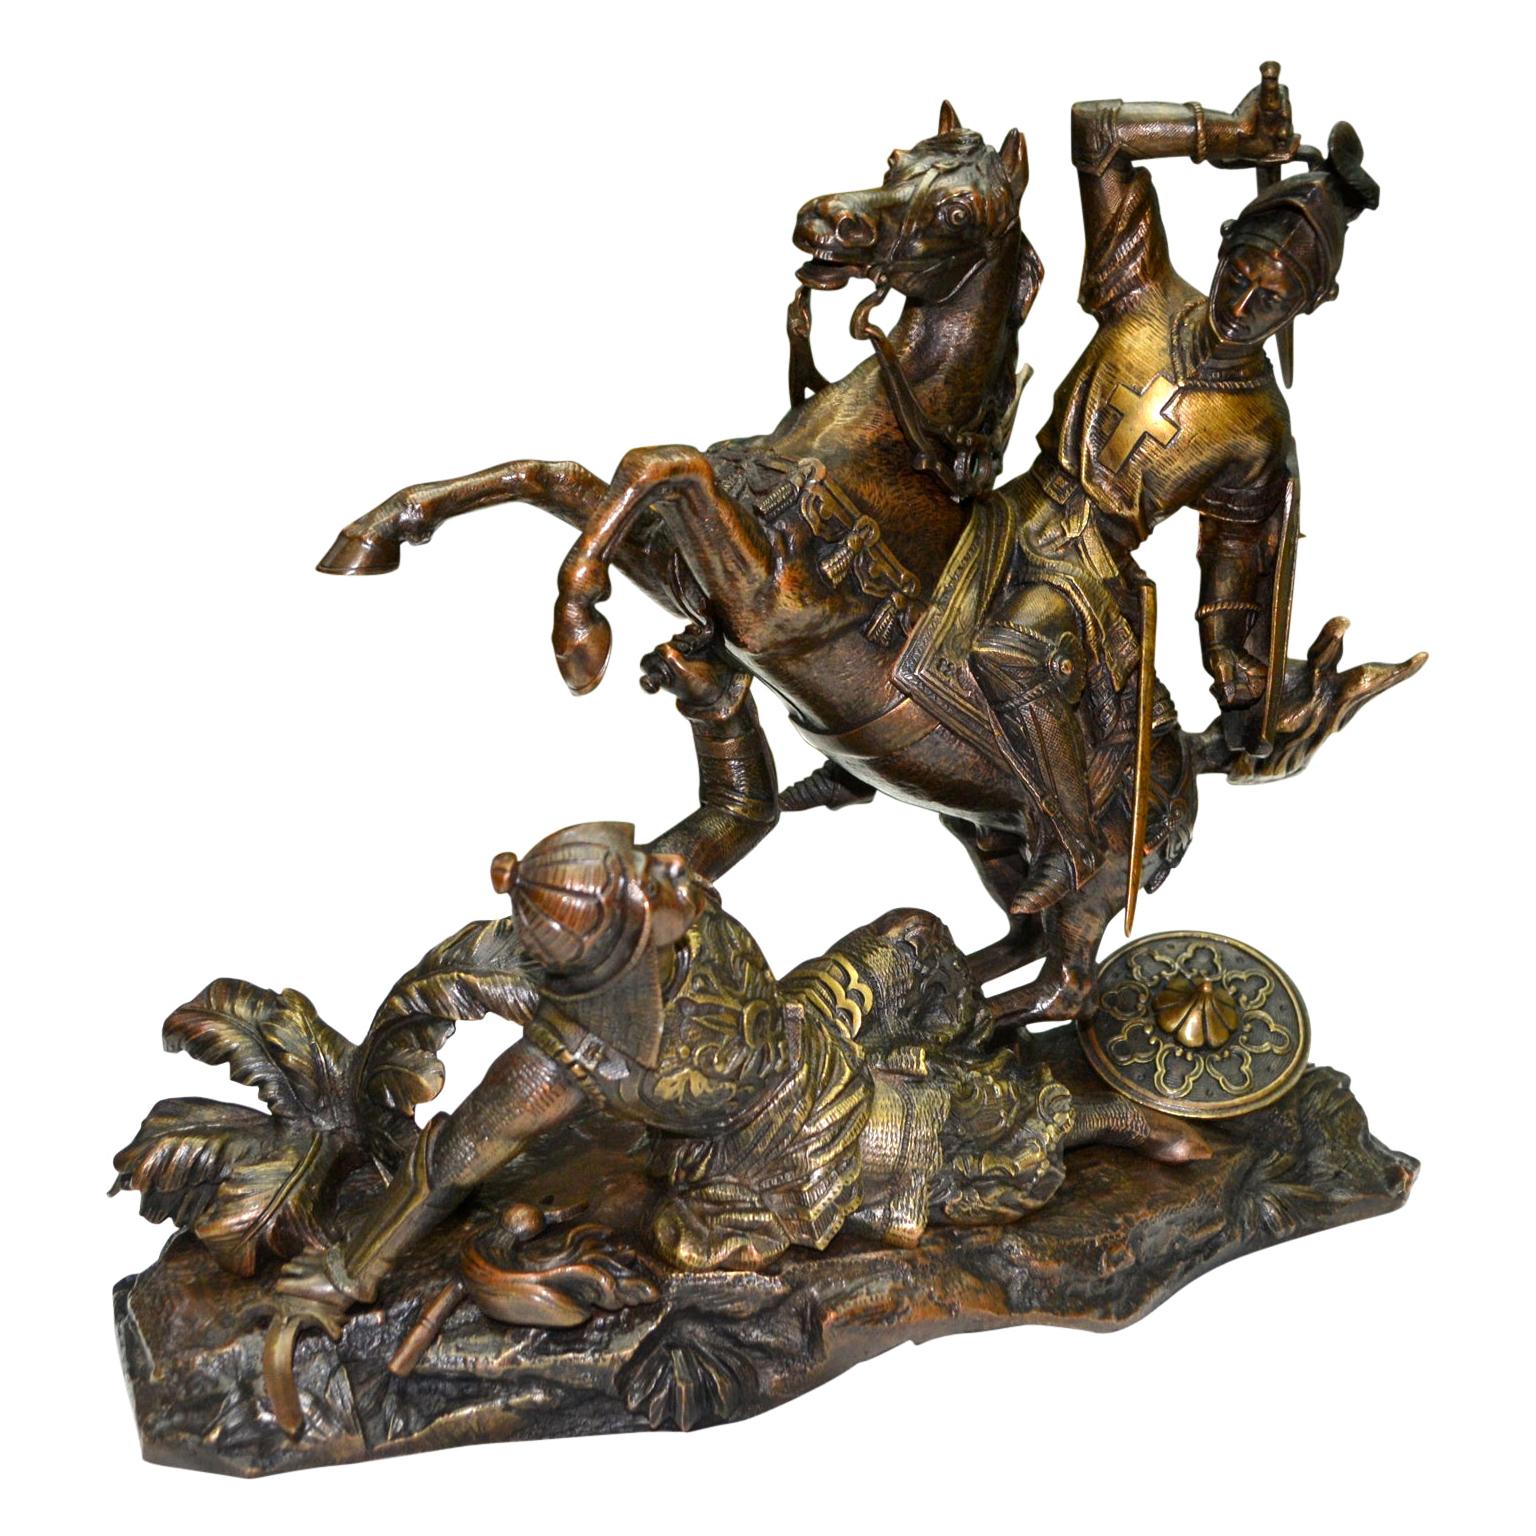  Troubadour Bronze of the Combat of Charles Martel and the Ottoman King Abderame